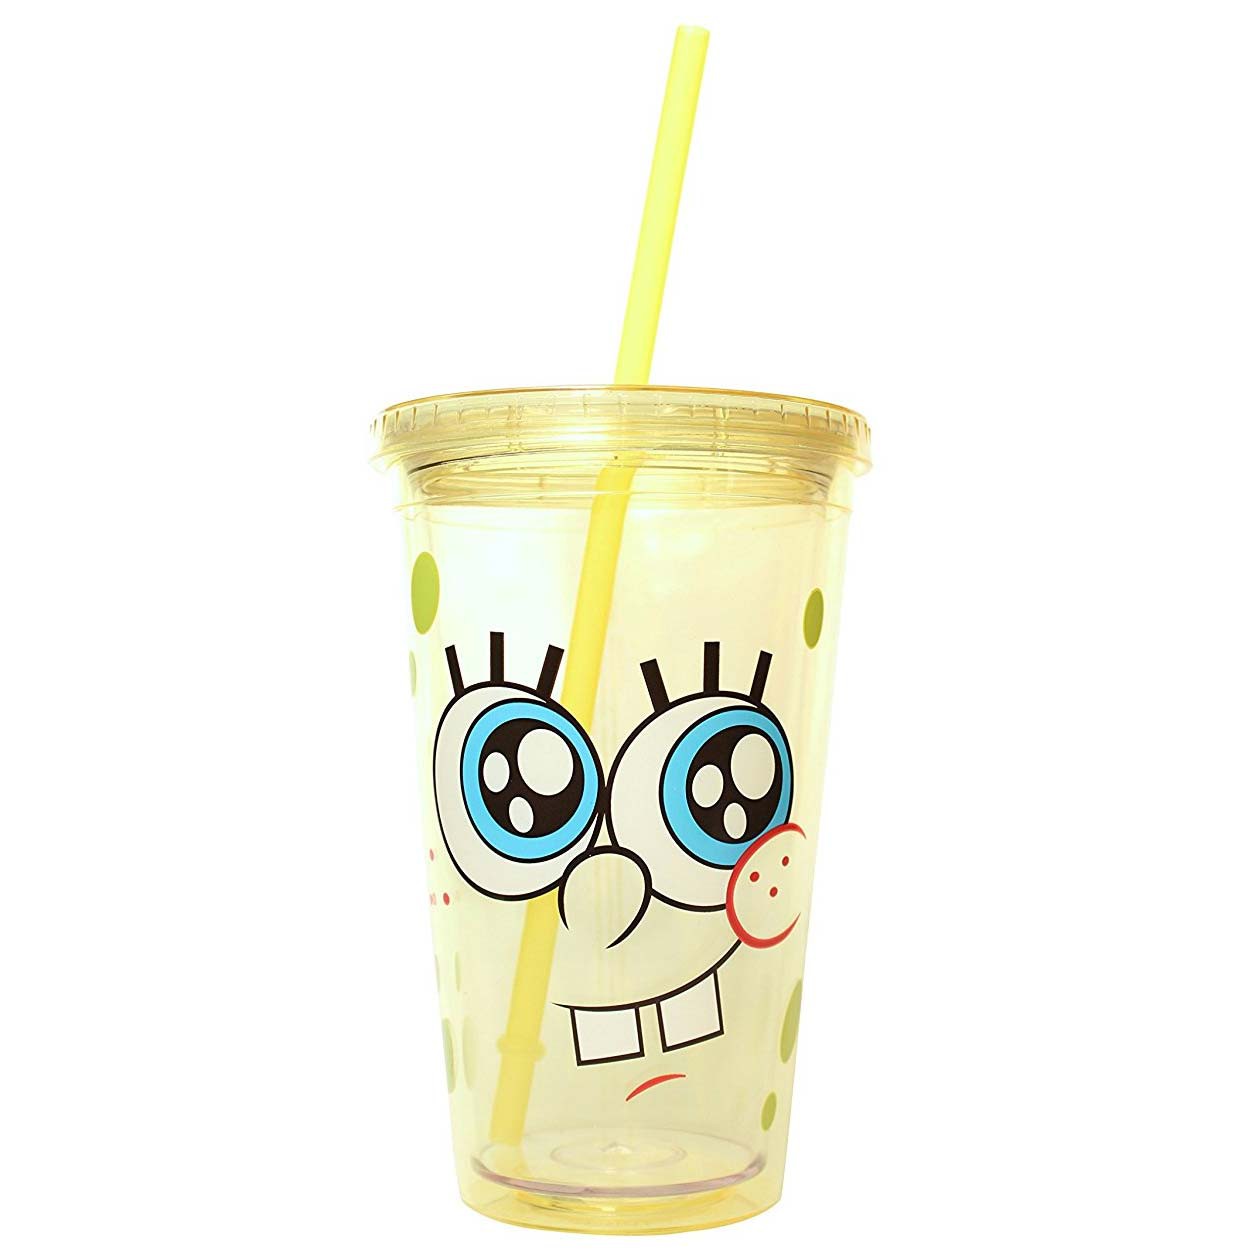 Spongebob Squarepants Cup With Lid And Straw